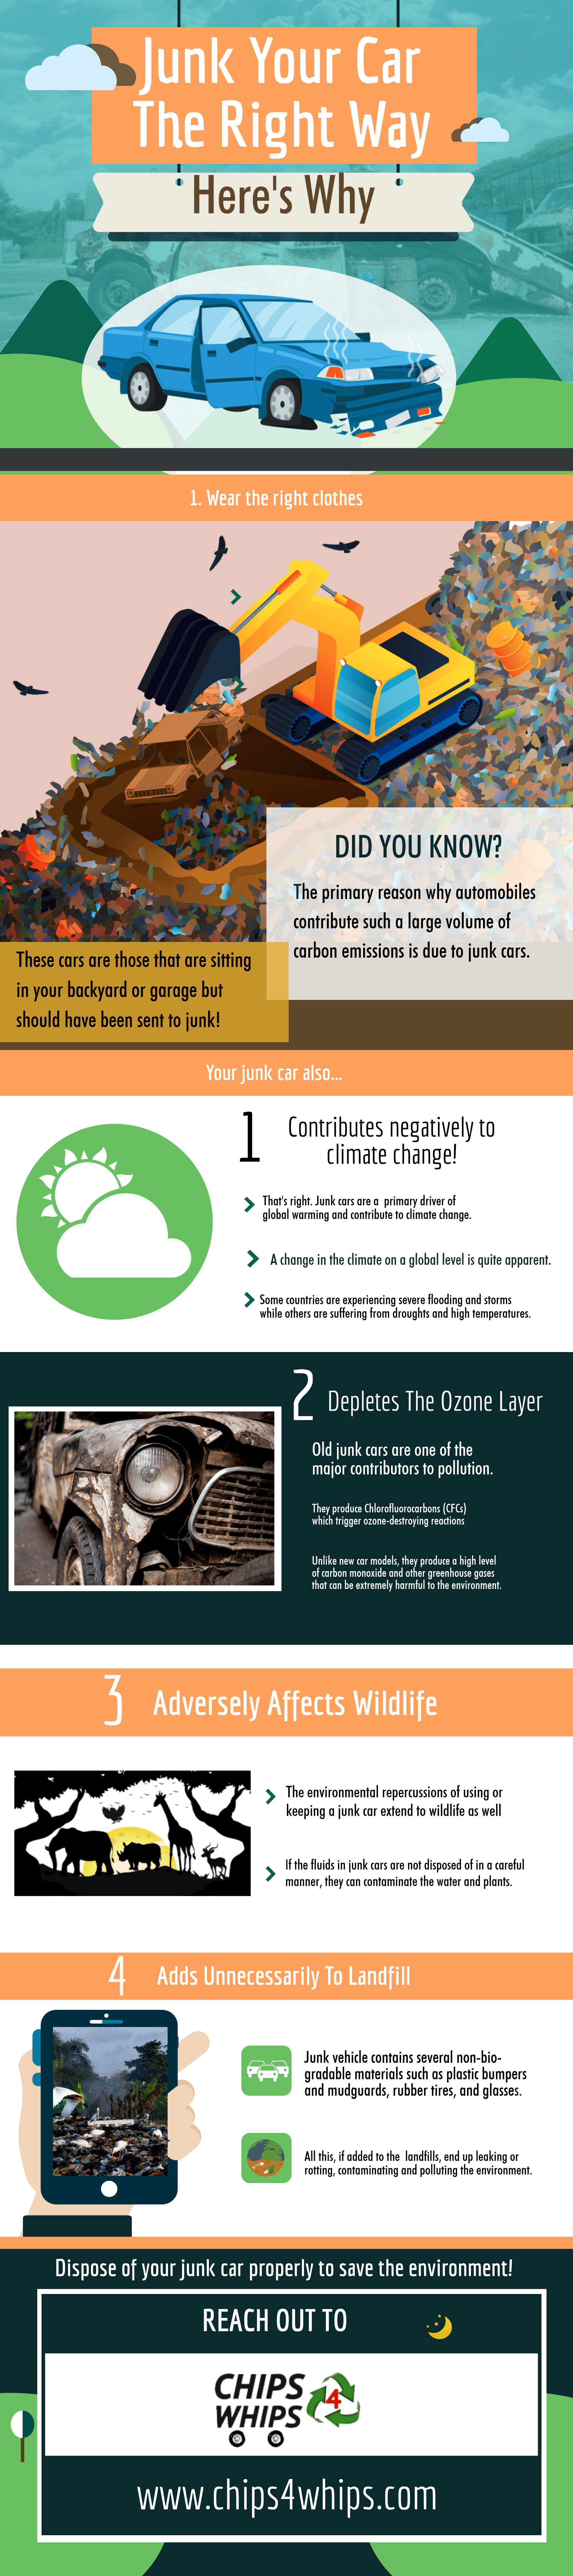 Junk your Car infographic